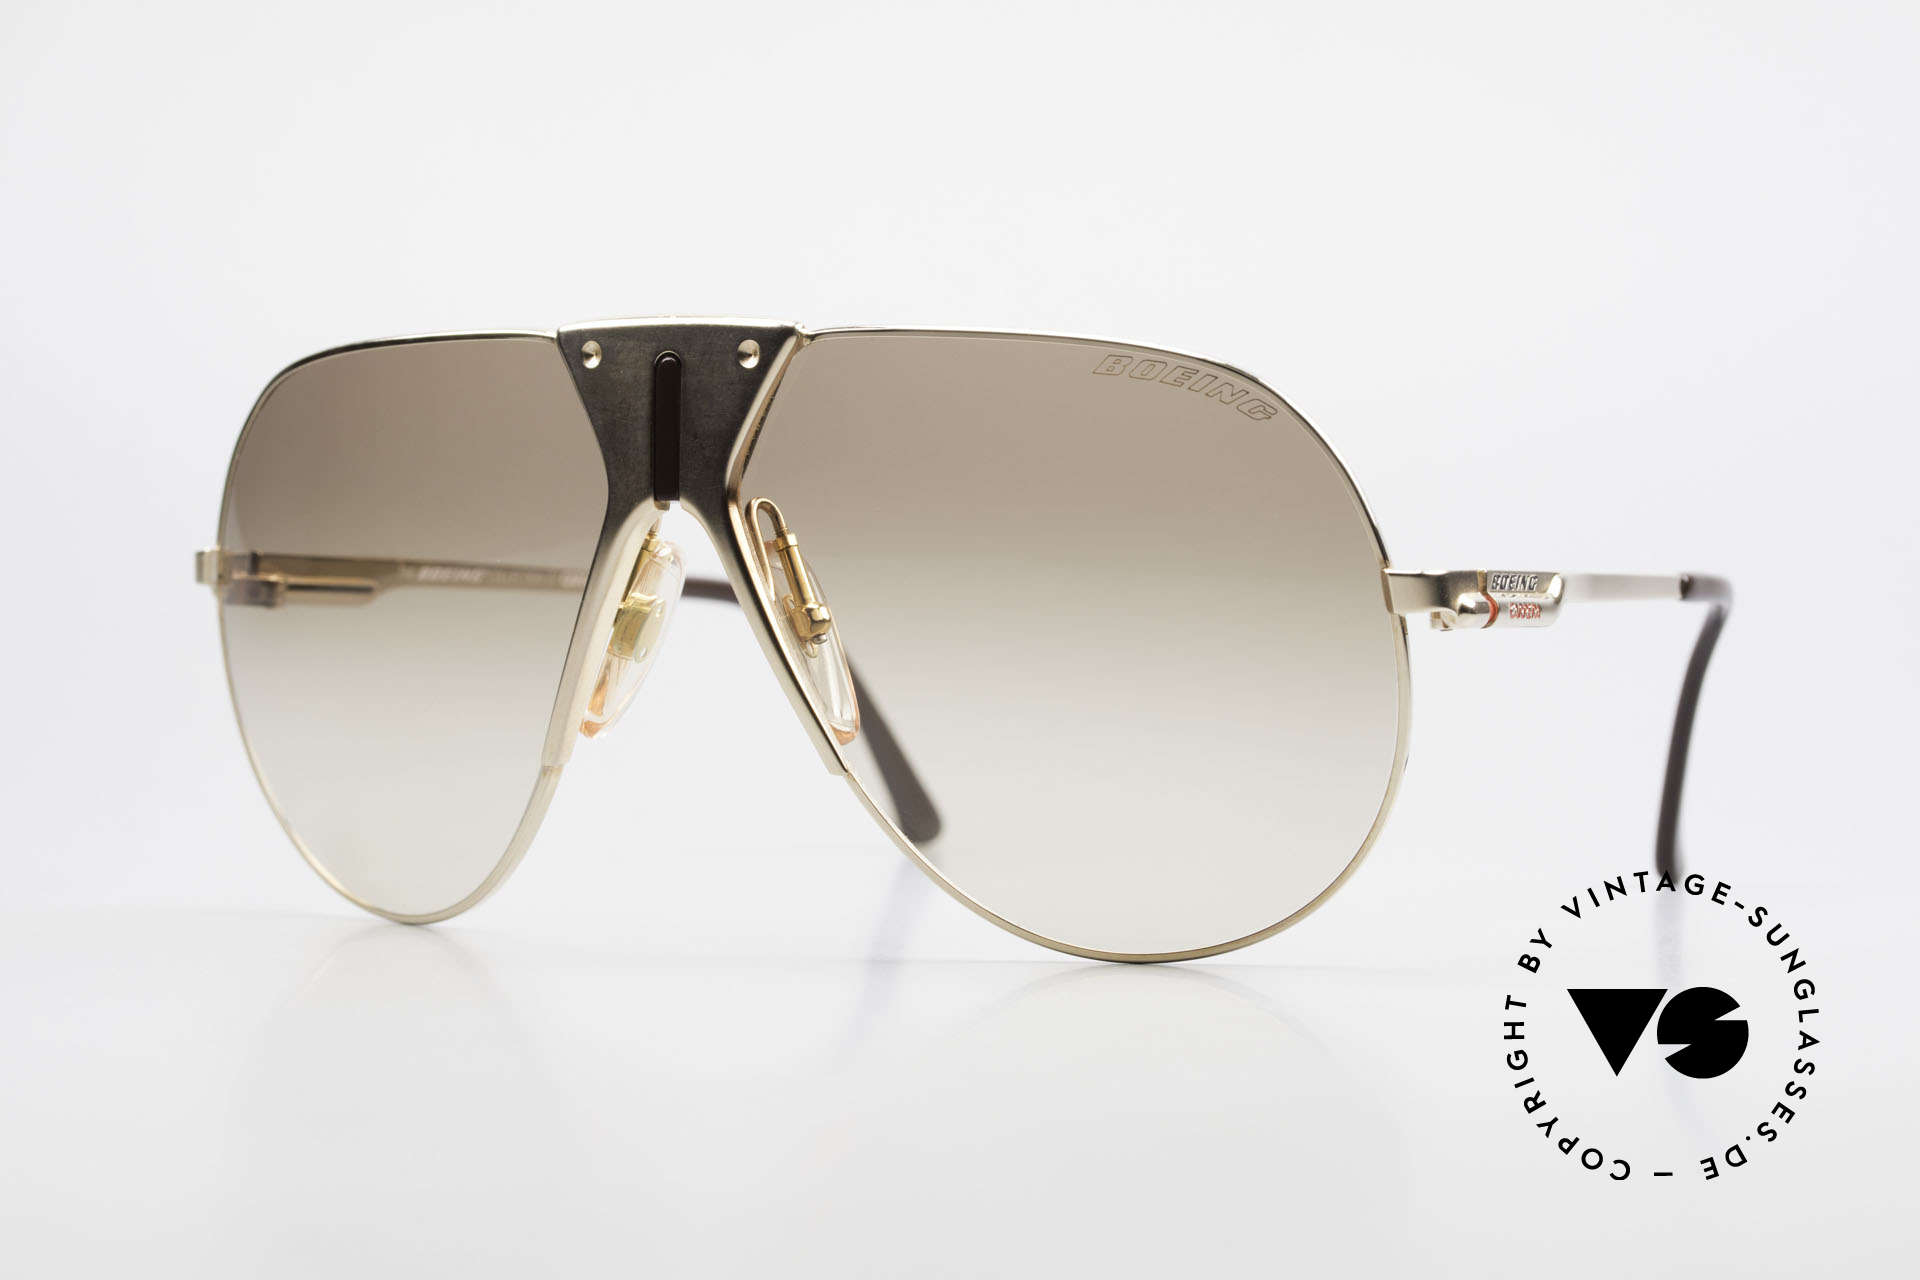 Boeing 5701 Famous 80's Pilots Sunglasses, The BOEING Collection by Carrera from 1988/1989, Made for Men and Women